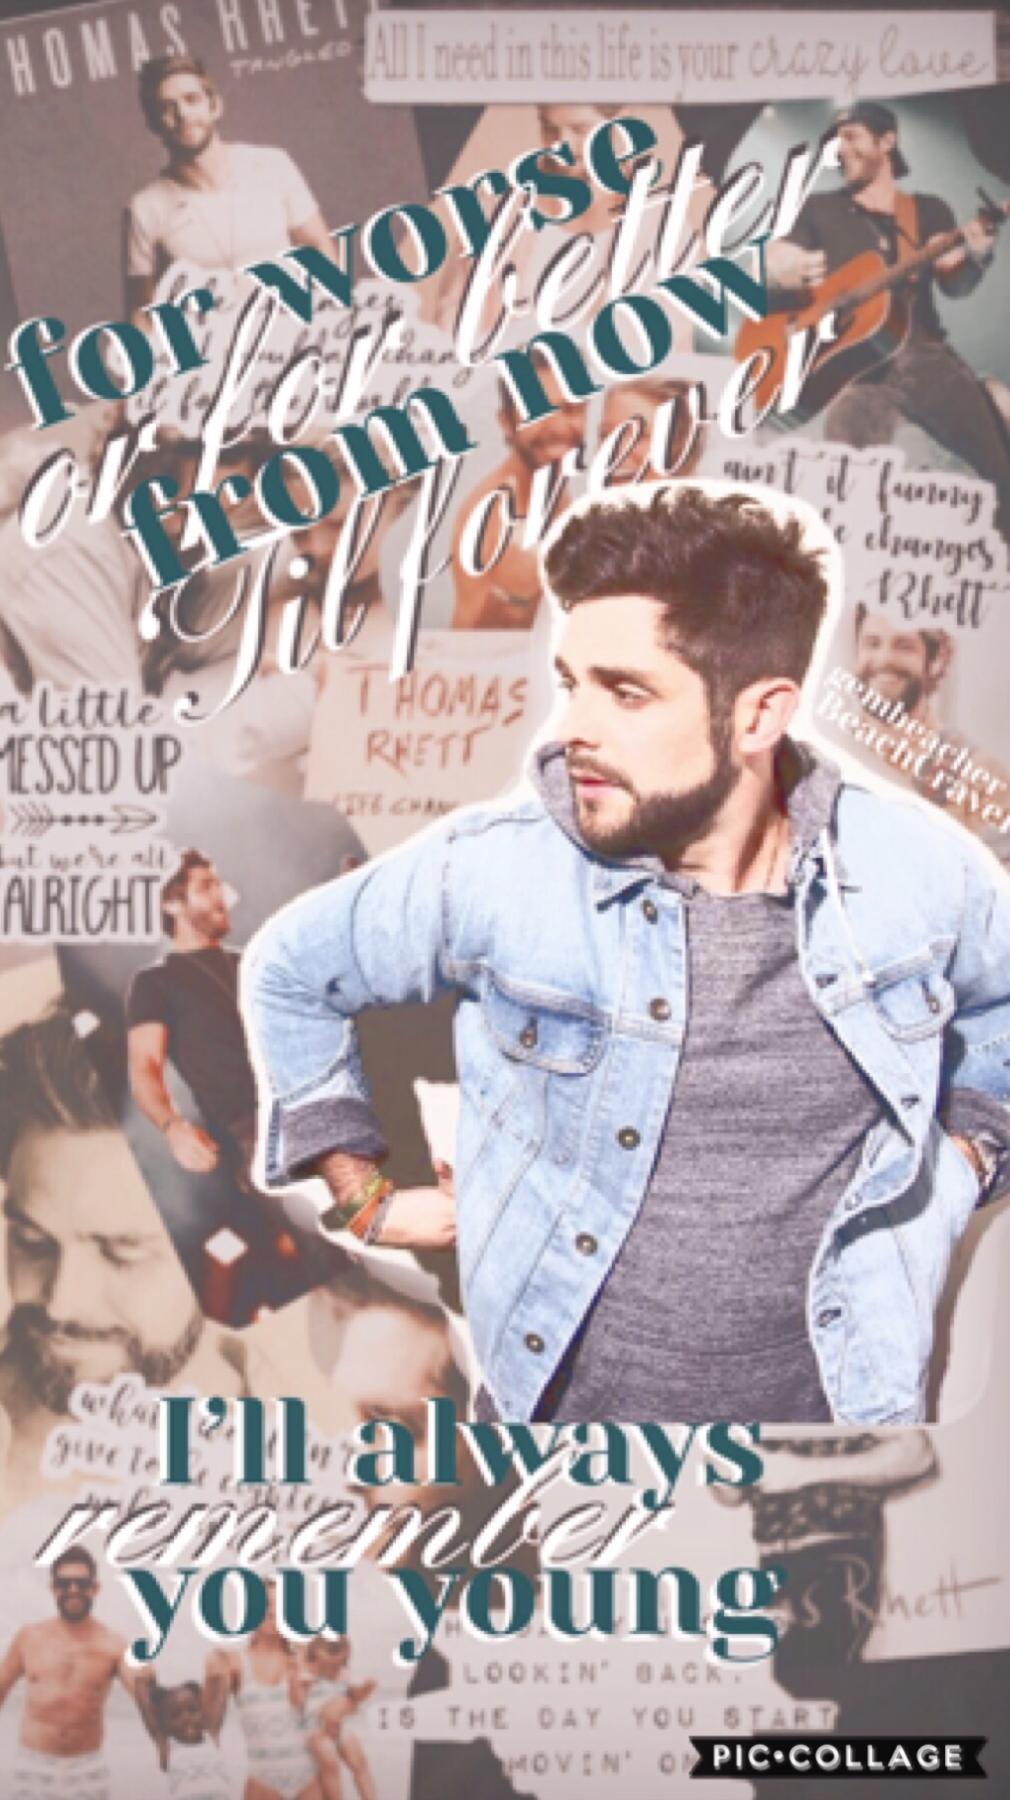 Collab with Gembeacher!! 
This is a Thomas Rhett collage. Comment if you listen to him. If you haven’t, do it!! He is an amazing country singer. 